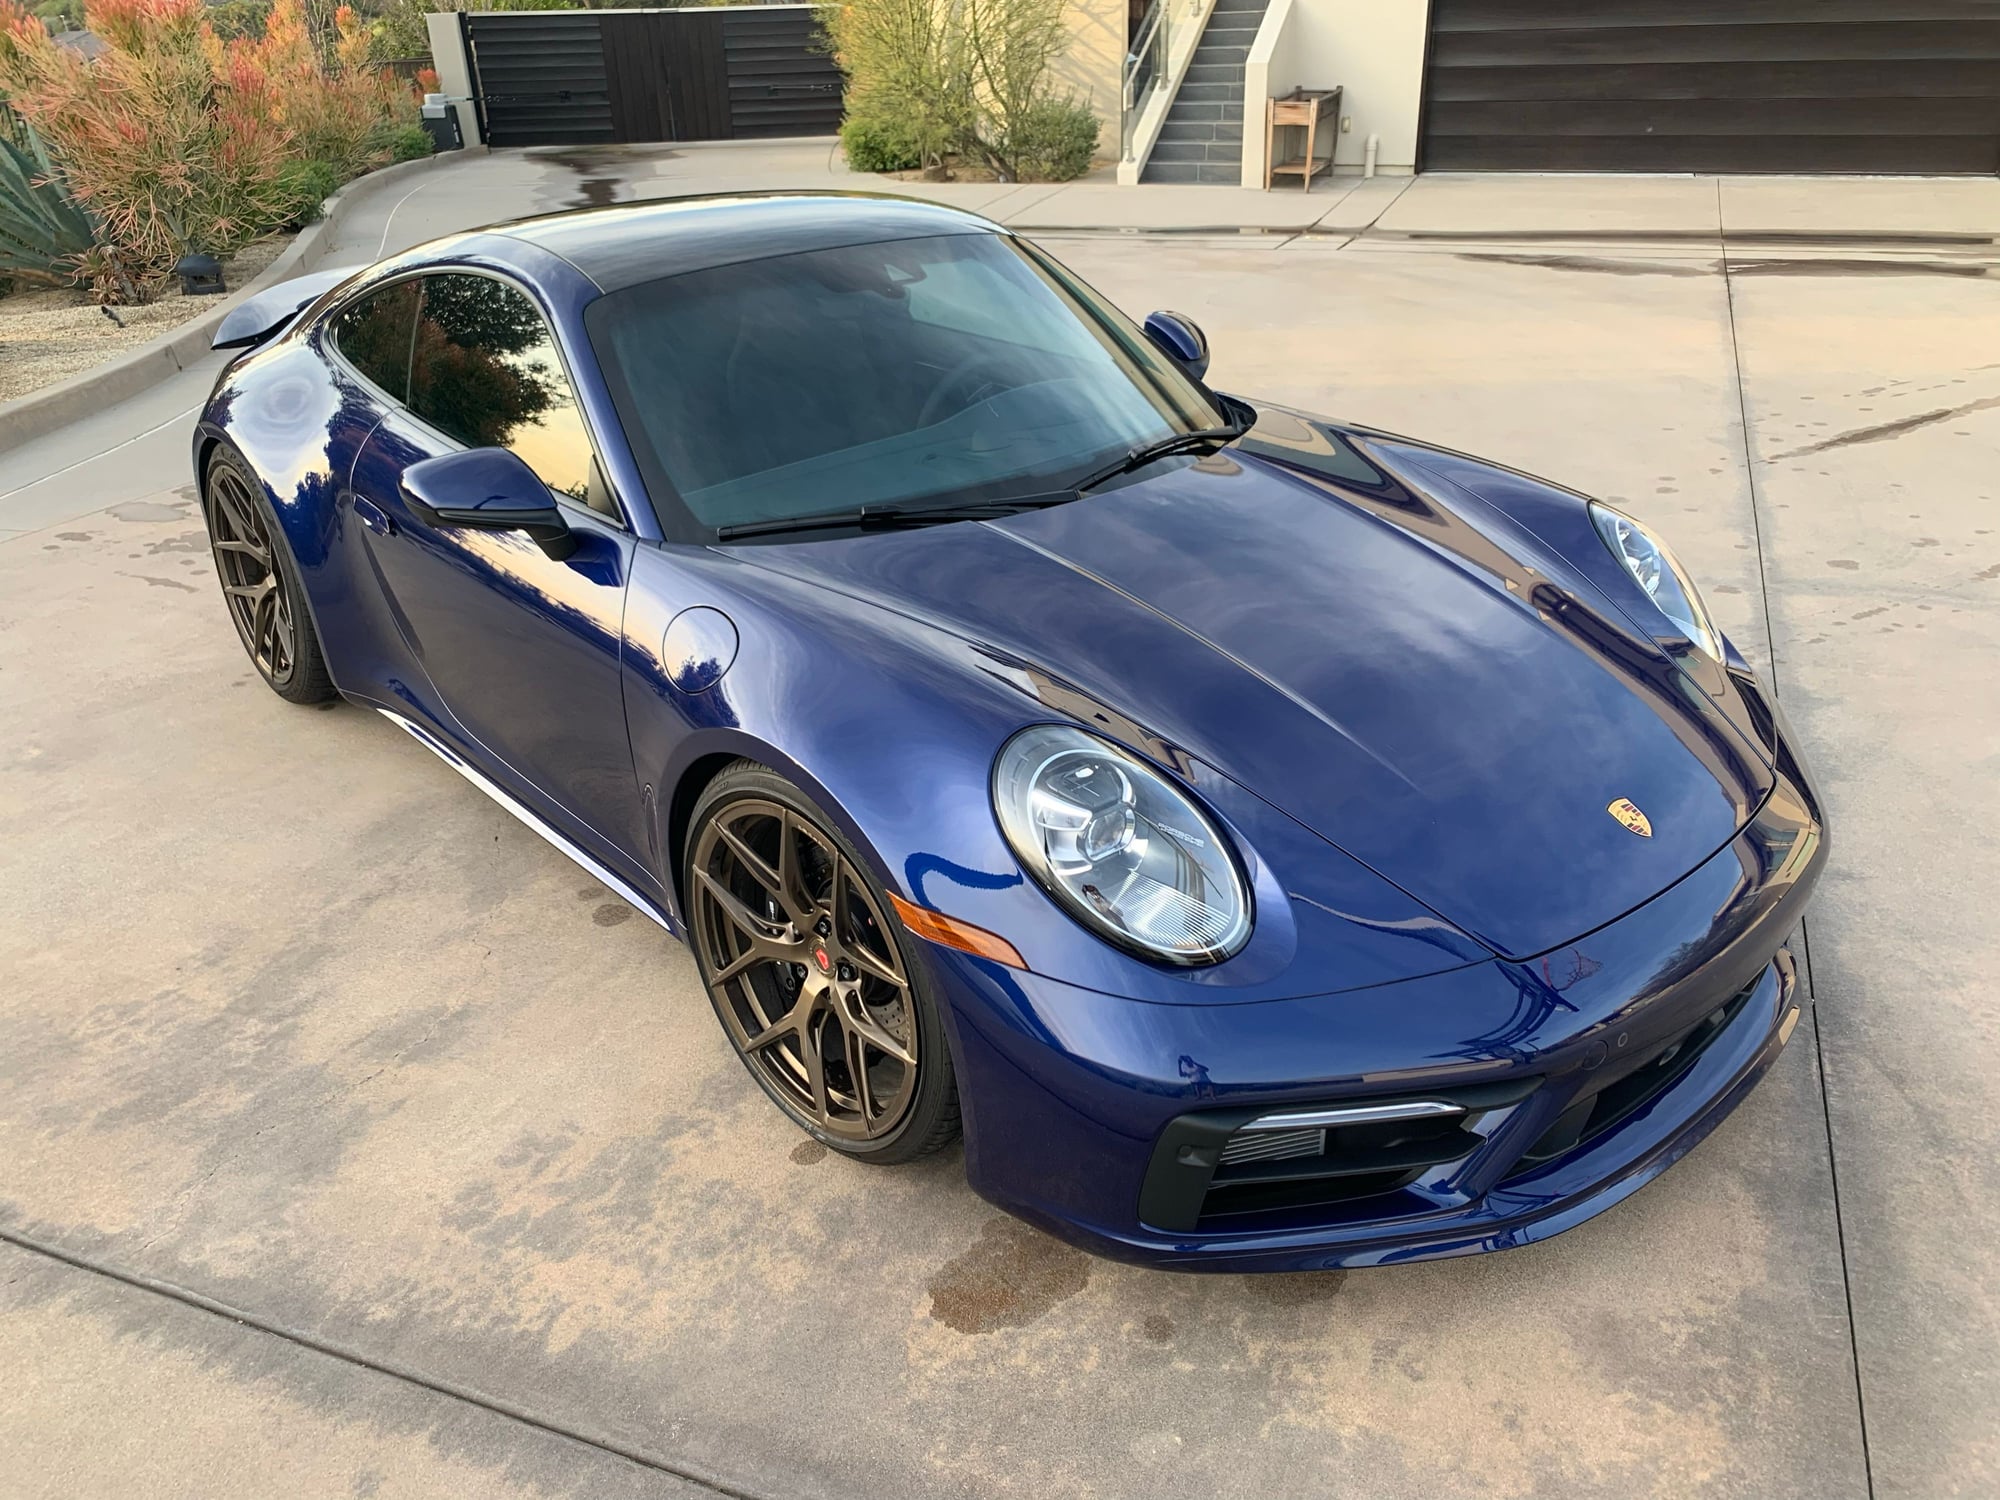 2020 Porsche 911 - 992 C4S Gentian Blue / Slate Grey STUNNING AND LOADED!!!! - Used - VIN WP0AB2A96LS227290 - 780 Miles - 6 cyl - 4WD - Automatic - Coupe - Blue - Indianapolis, IN 46112, United States